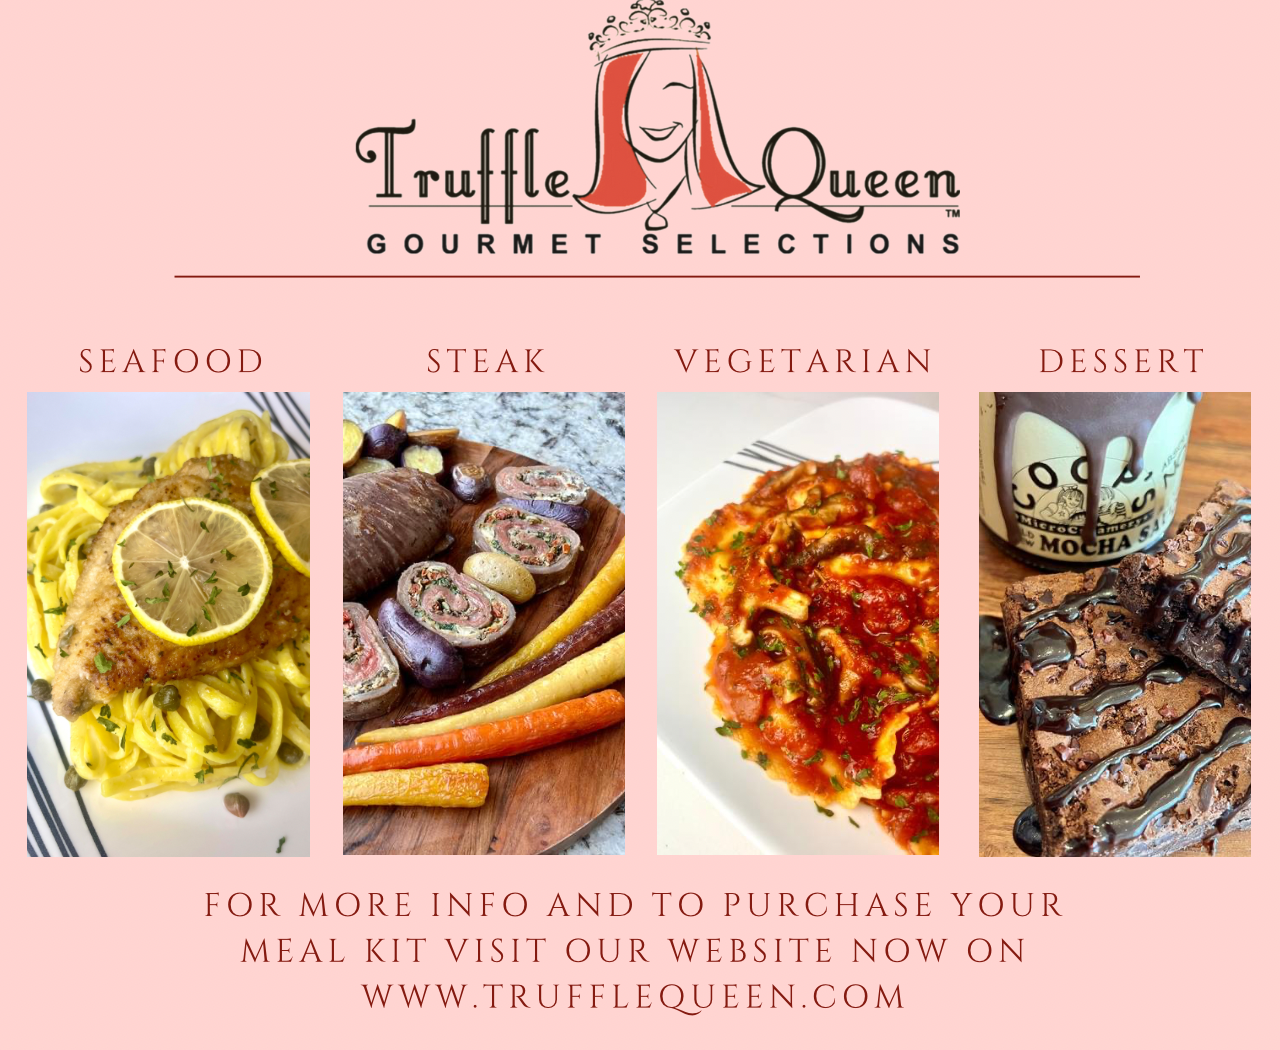 graphic featuring 4 valentine's day meal kits seafood, steak, vegetarian, dessert from Truffle queen in pike place market